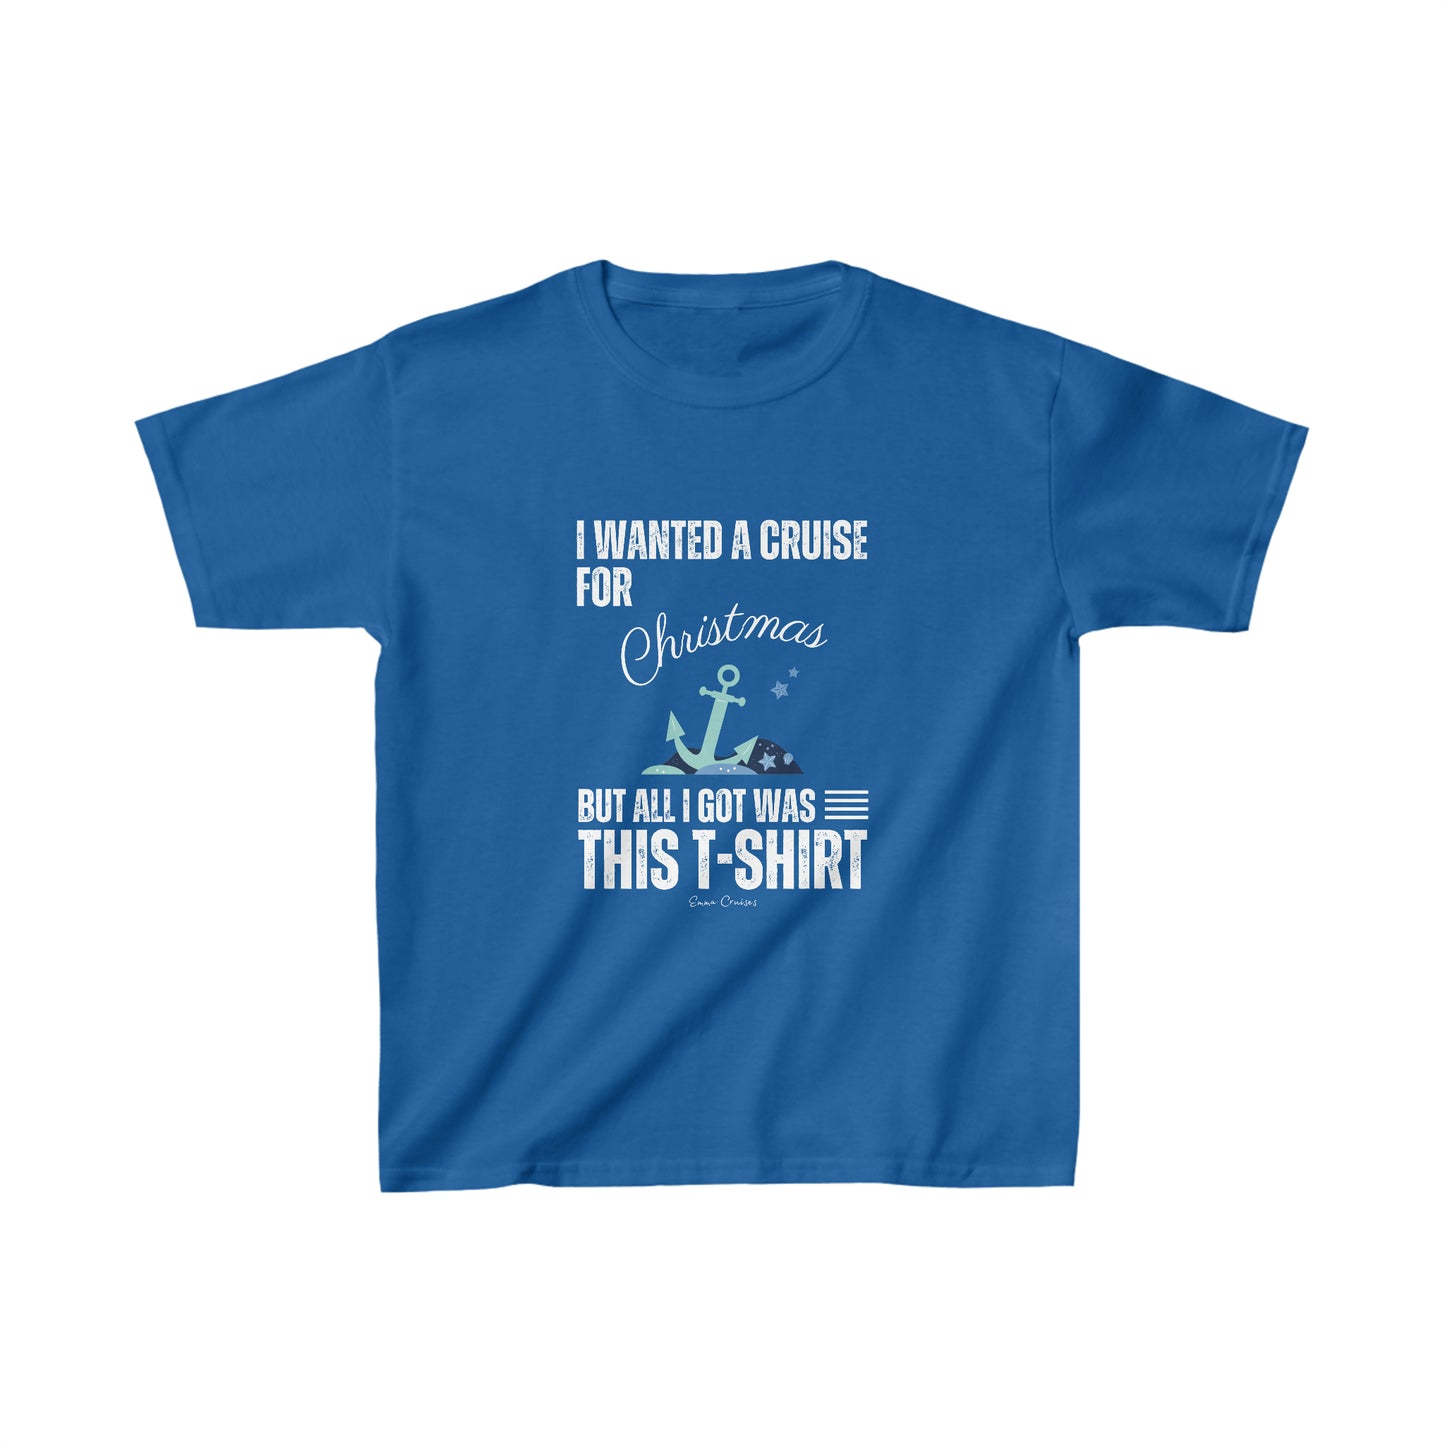 I Wanted a Cruise for Christmas - Kids UNISEX T-Shirt